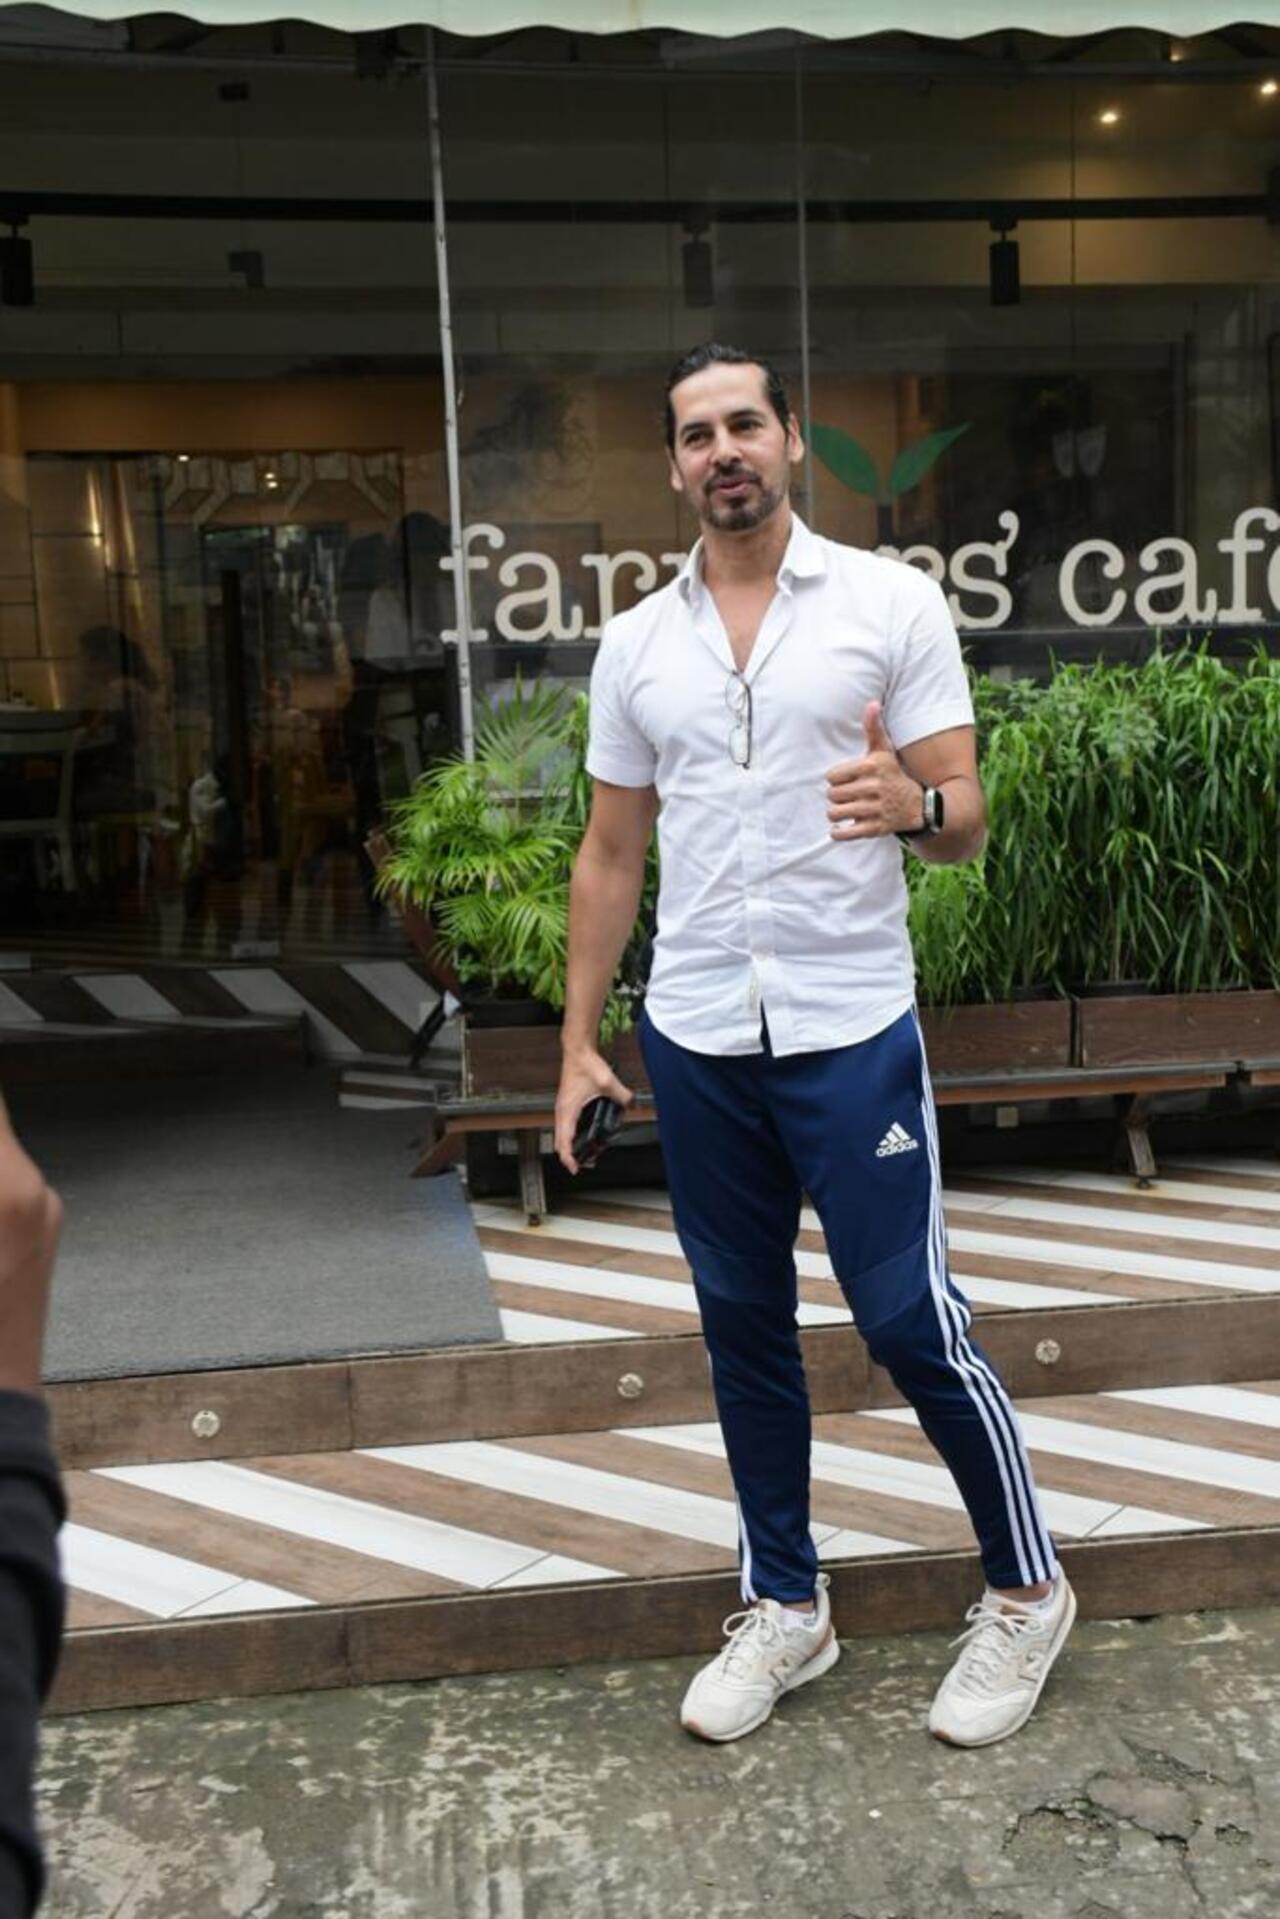  Dino Morea was looking dashing as he paired a cool white shirt with blue jeans